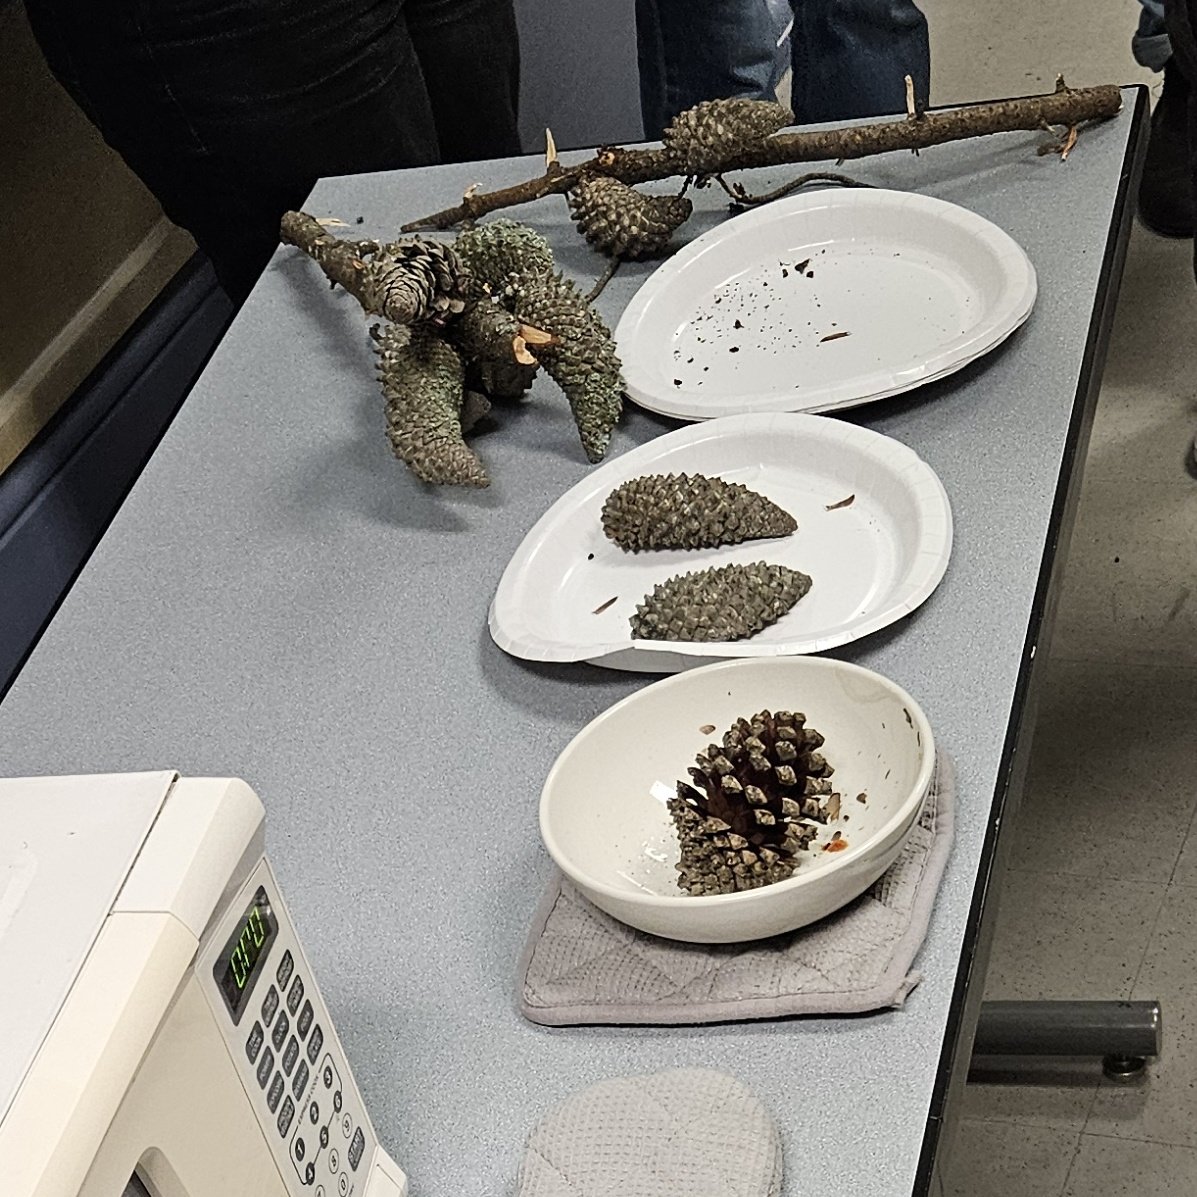 Back from an amazing @fireecology ##FireCon2023 & wrapped up our @UW_SEFS 401/501 class w/ the favorite activity every year: opening serotinous pine cones by simulating forest fire in a microwave. I will never tire of the magic of serotiny as an amazing fire-adapted trait. 🌲🔥